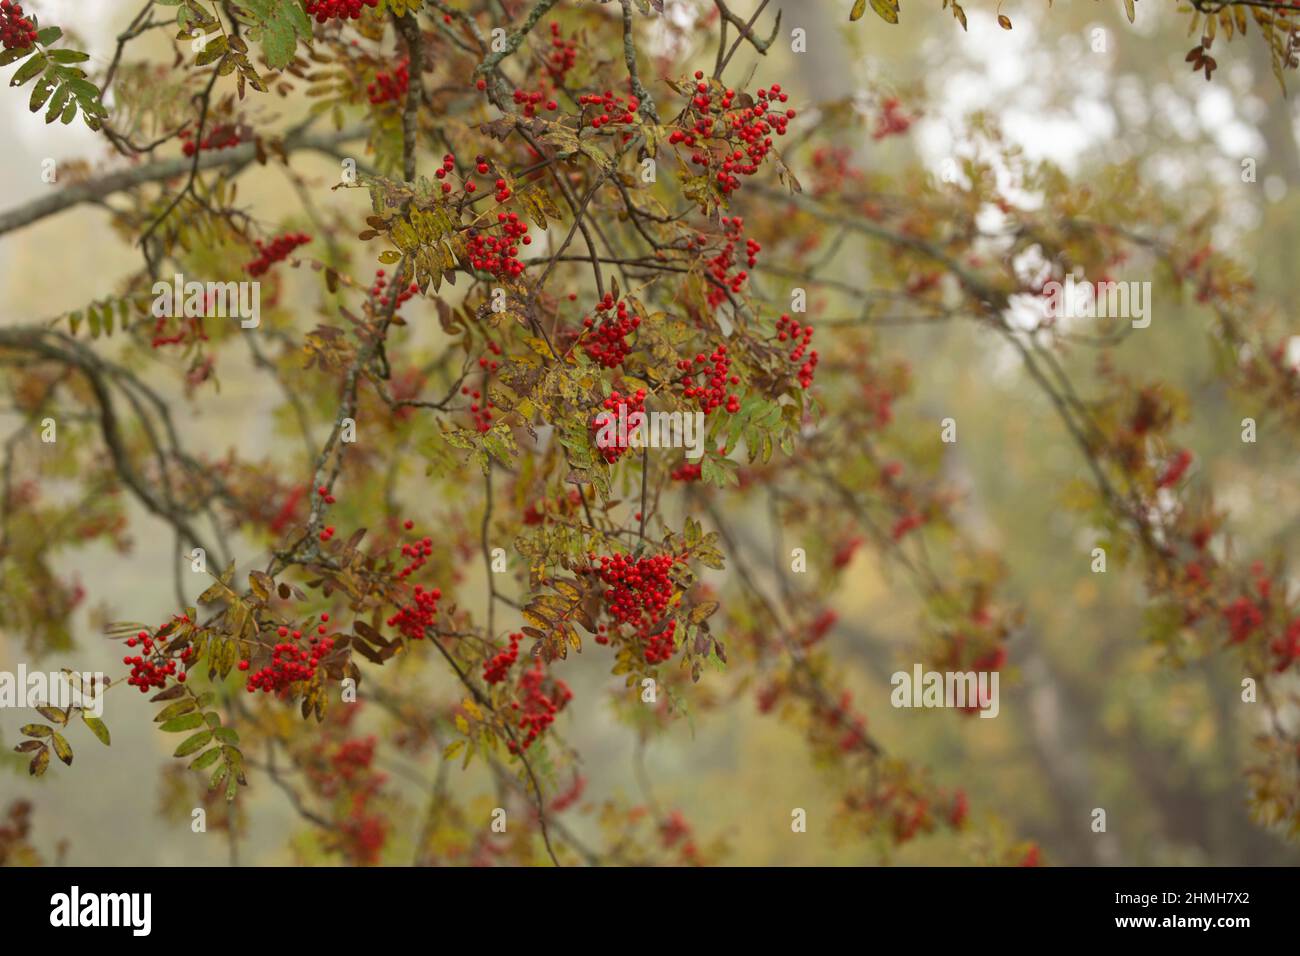 Rowan (Sorbus aucuparia) branches with red berries in September, Stock Photo